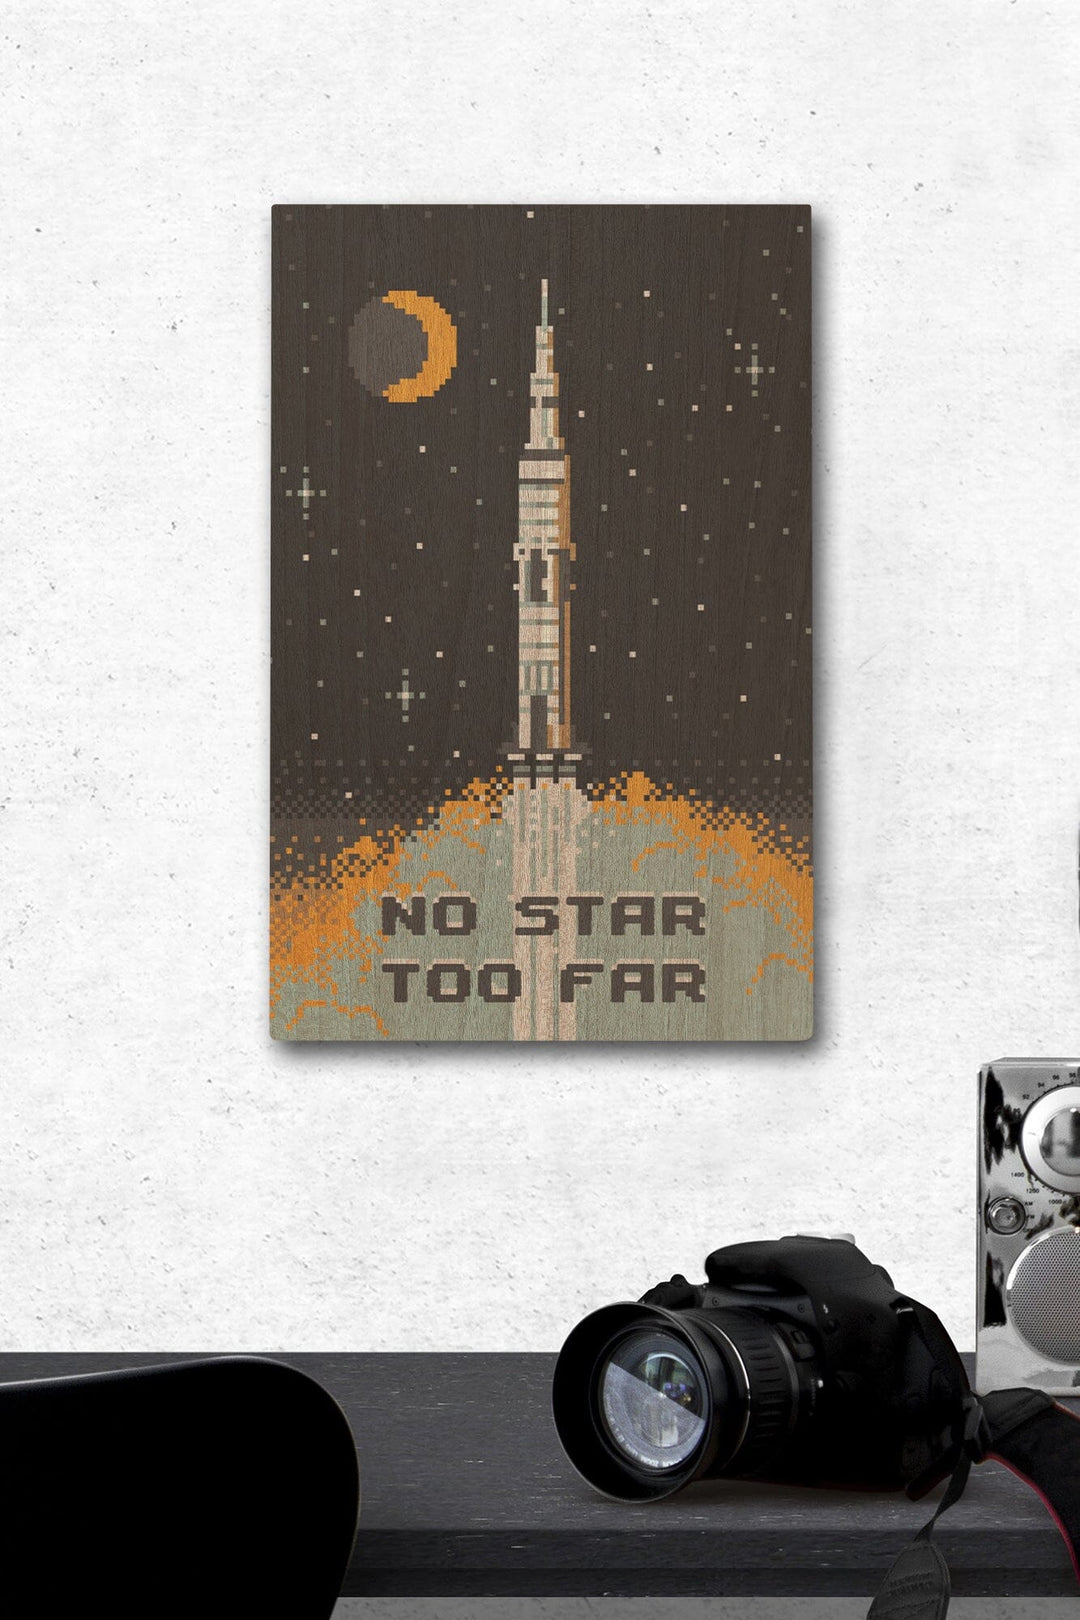 8-Bit Space Collection, Rocket, No Star Too Far, Wood Signs and Postcards Wood Lantern Press 12 x 18 Wood Gallery Print 